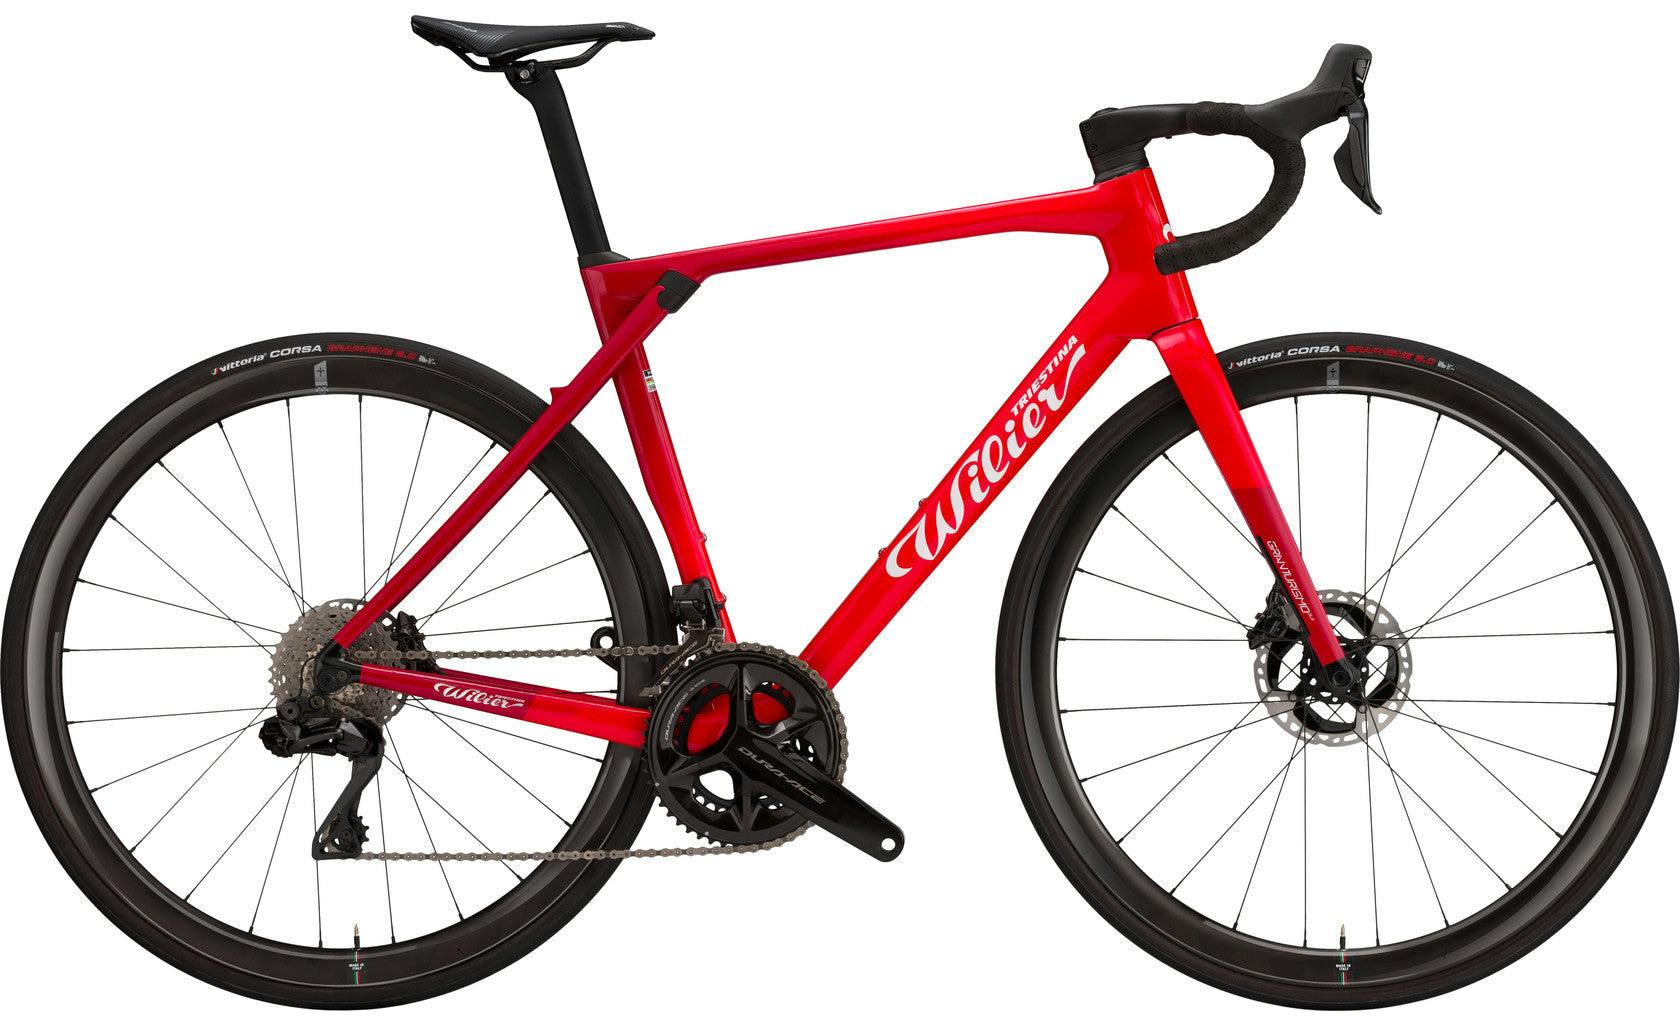 Wilier Triestina Grandturismo SLR (Red AXS) - r8_1